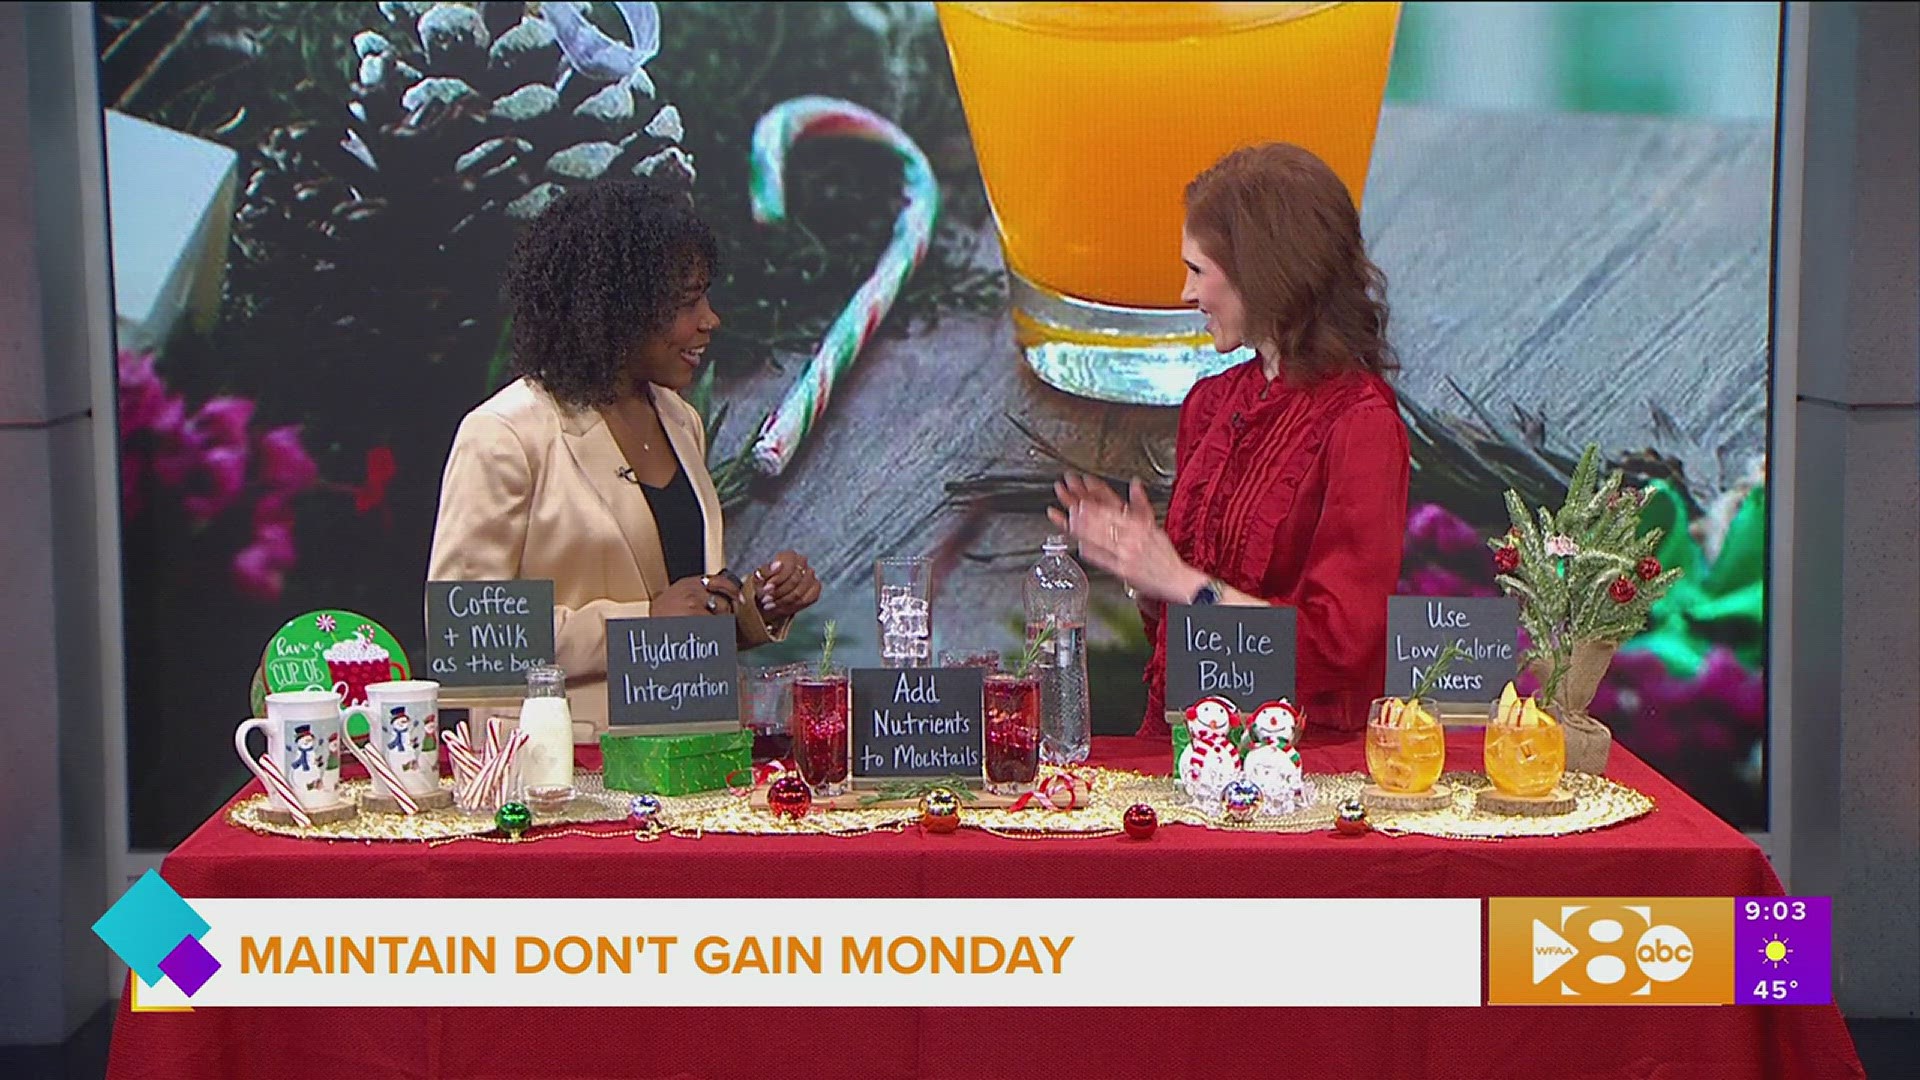 Registered dietician Amy Goodson offers tips on how to reduce the sugar and calories in festive holiday drive and add nutrients